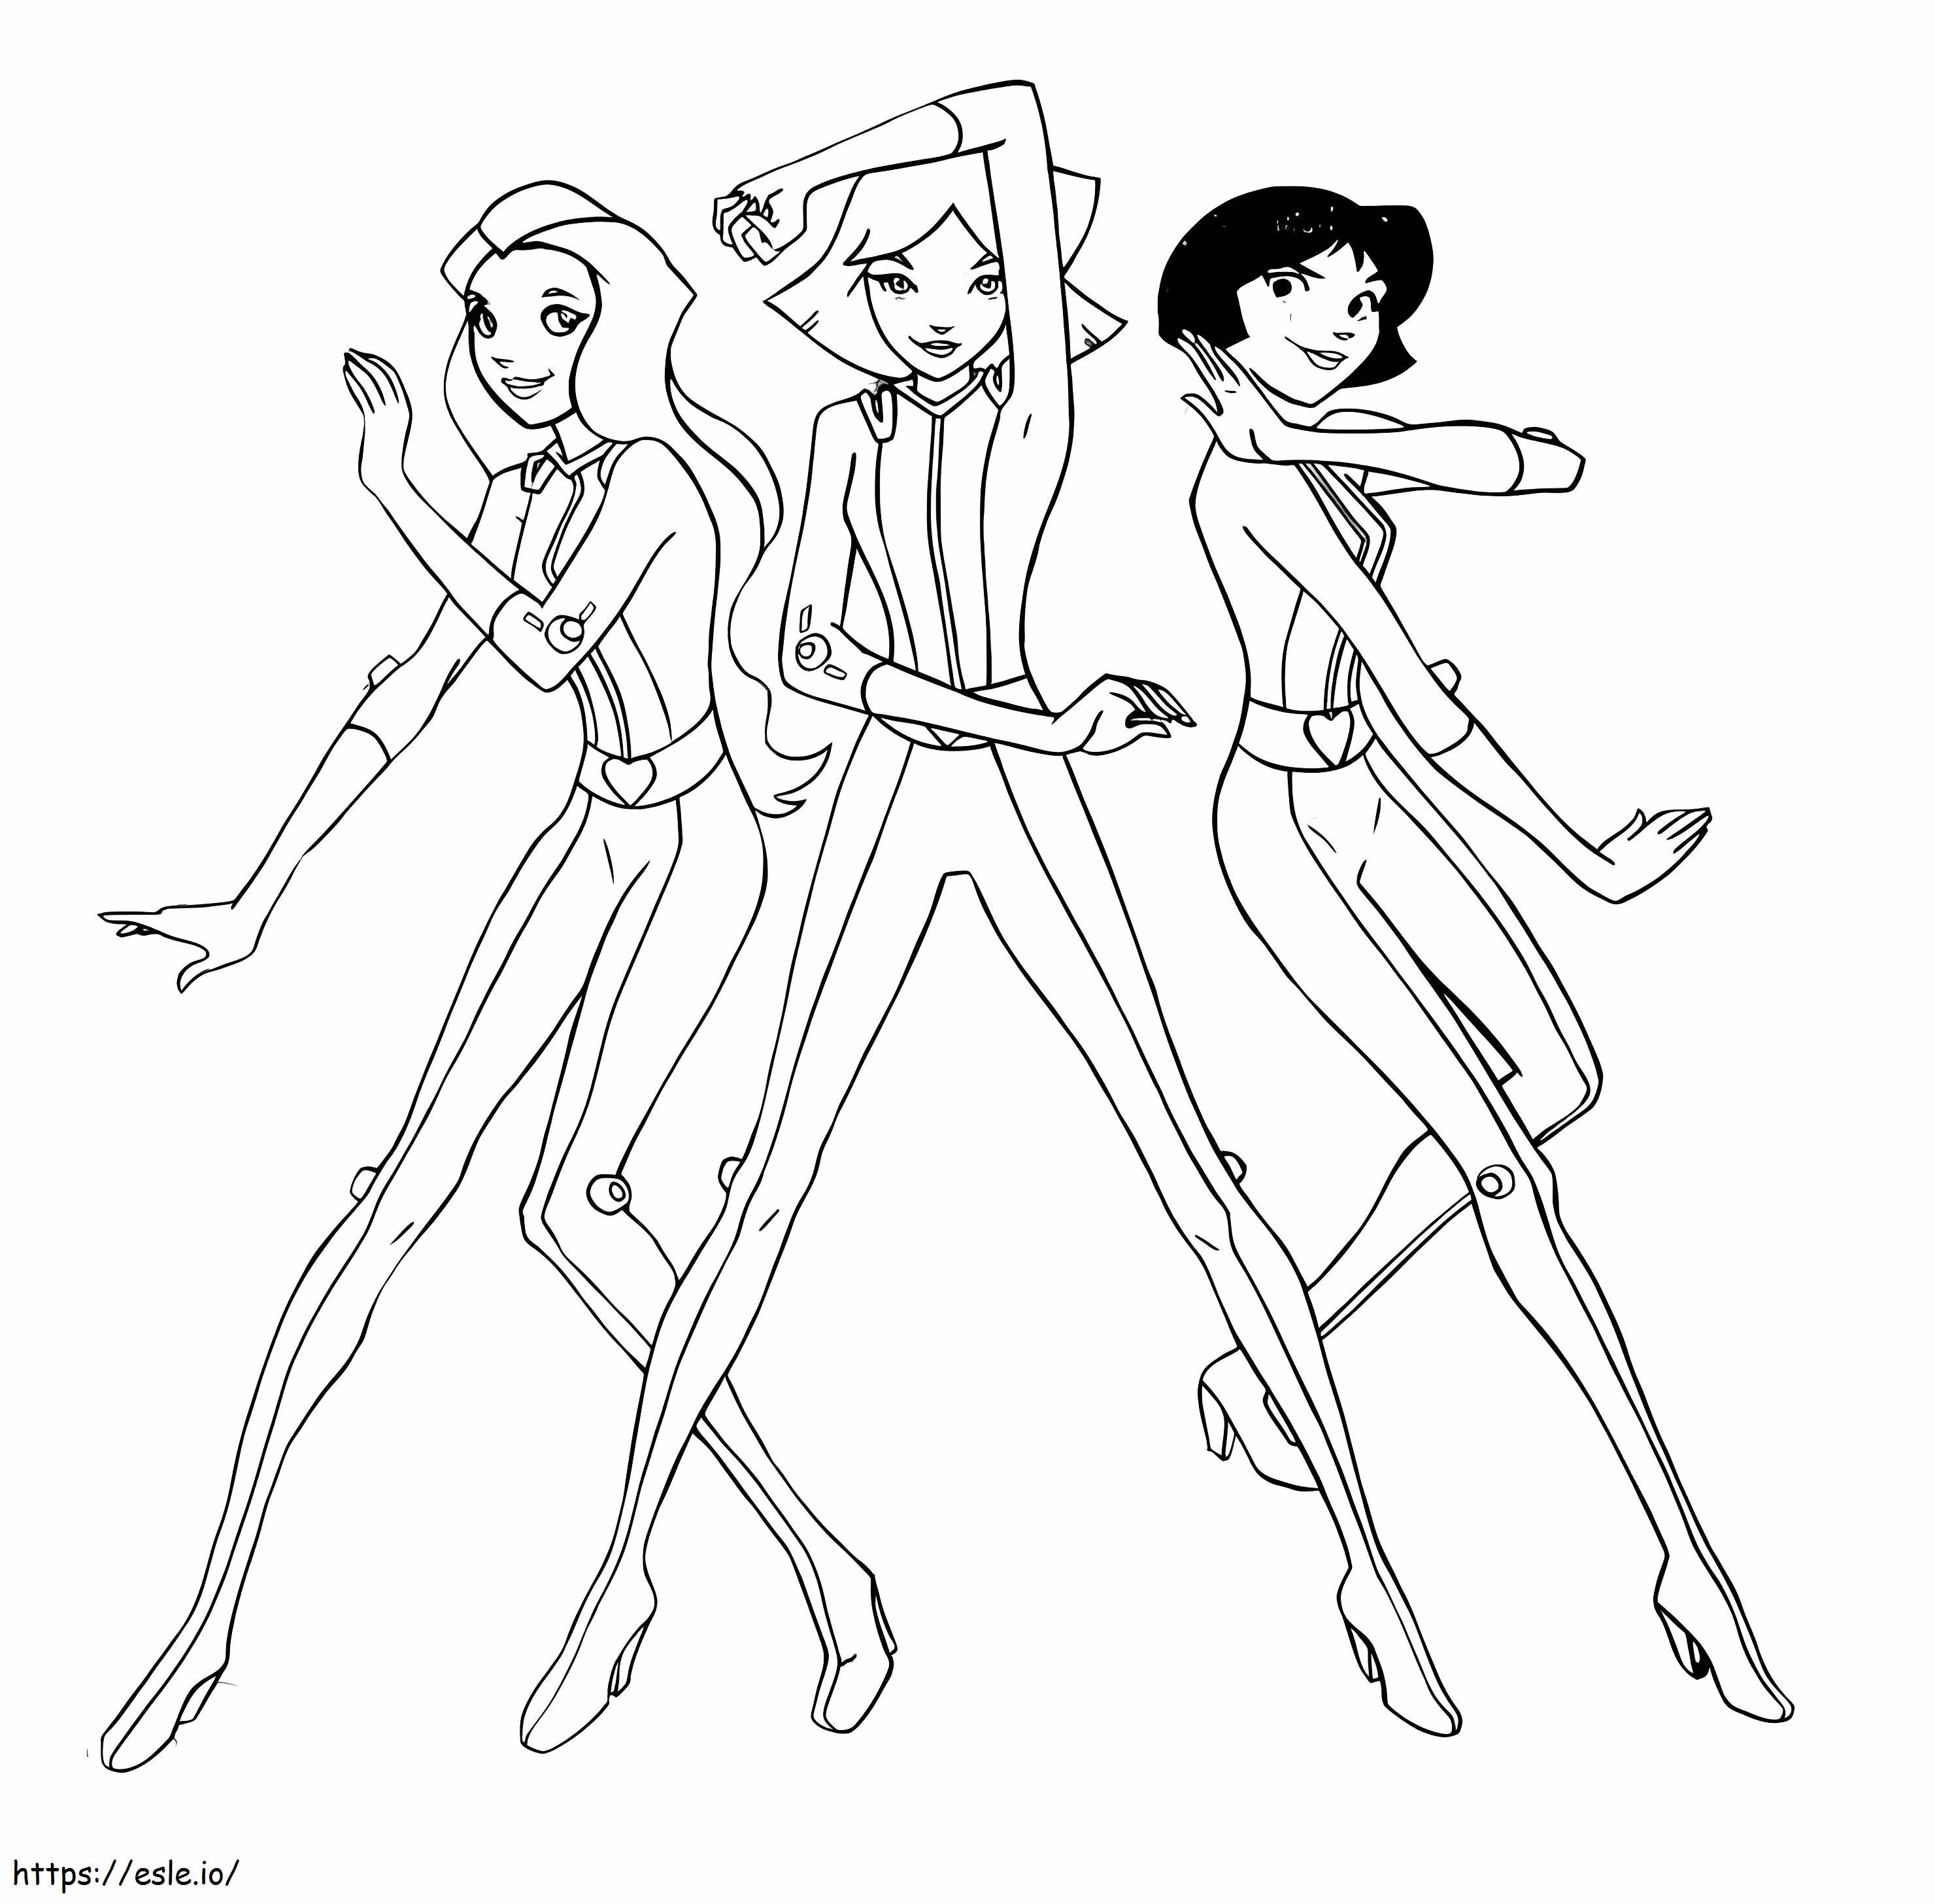 Printable Totally Spies coloring page